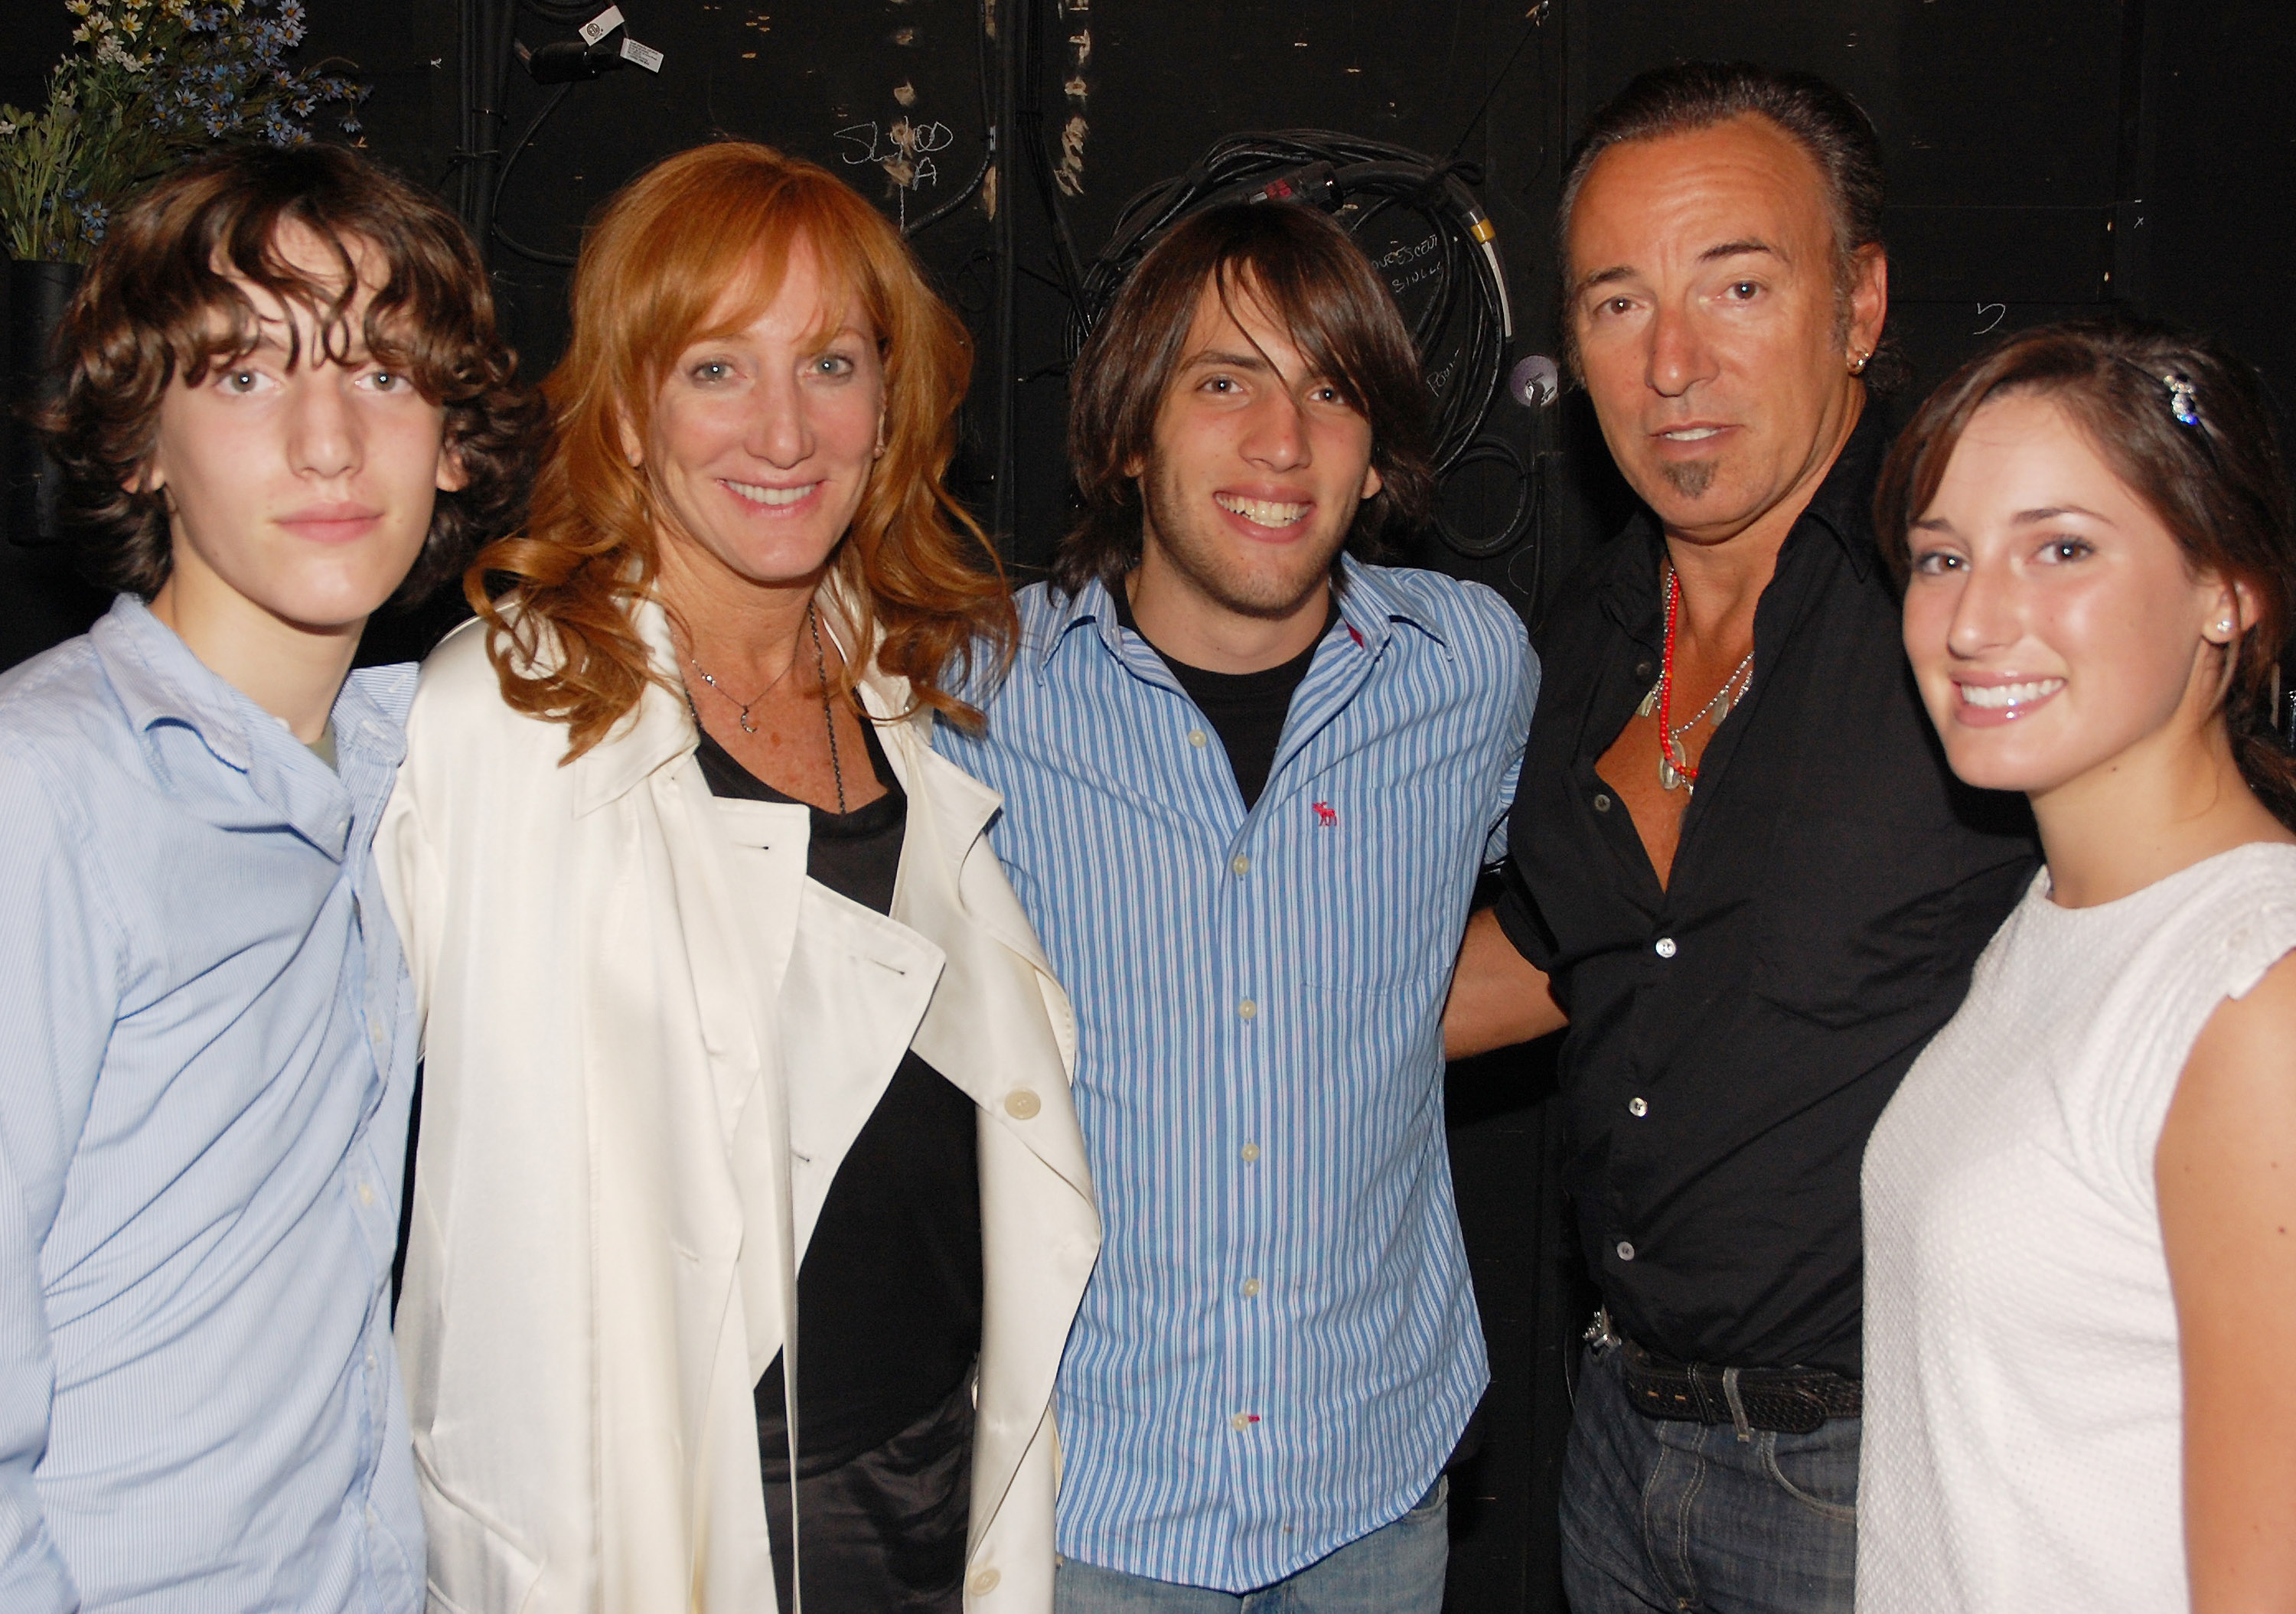 Sam Ryan Springsteen, Patti Scialfa, Evan James Springsteen, Bruce Springsteen and Jessica Rae Springsteen in New York City on August 8, 2008. | Source: Getty Images